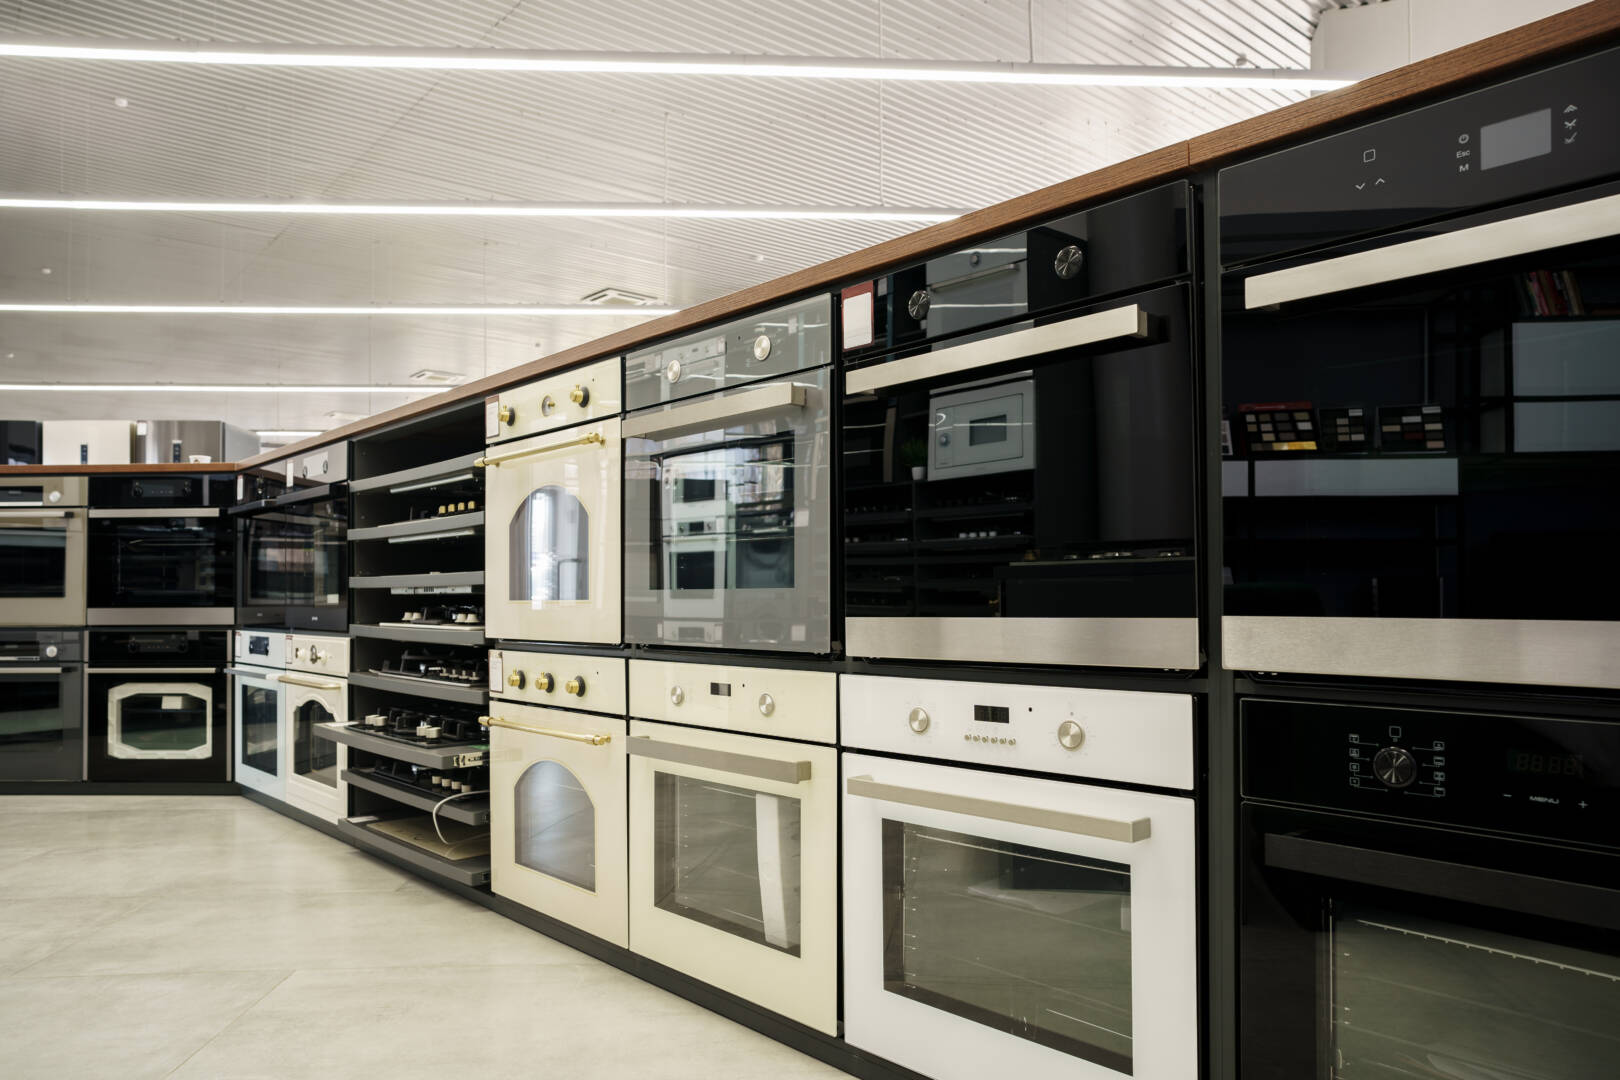 Electrical ovens, home appliances in the store